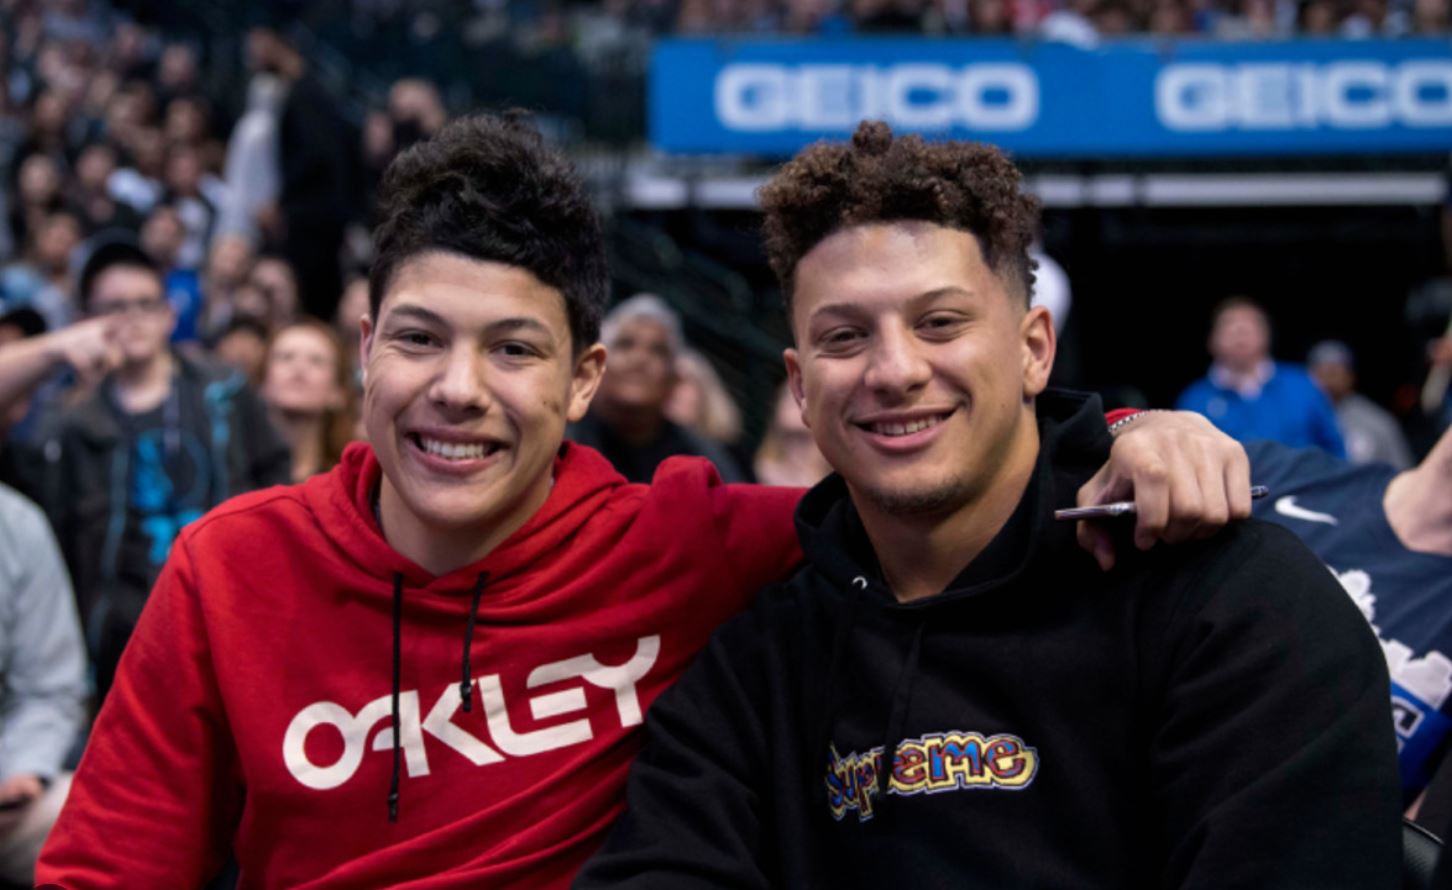 TikTok influencer Jackson Mahomes, brother of Kansas City Chiefs quarterback Patrick Mahomes, was taken into custody on Wednesday morning on charges of sexual battery.